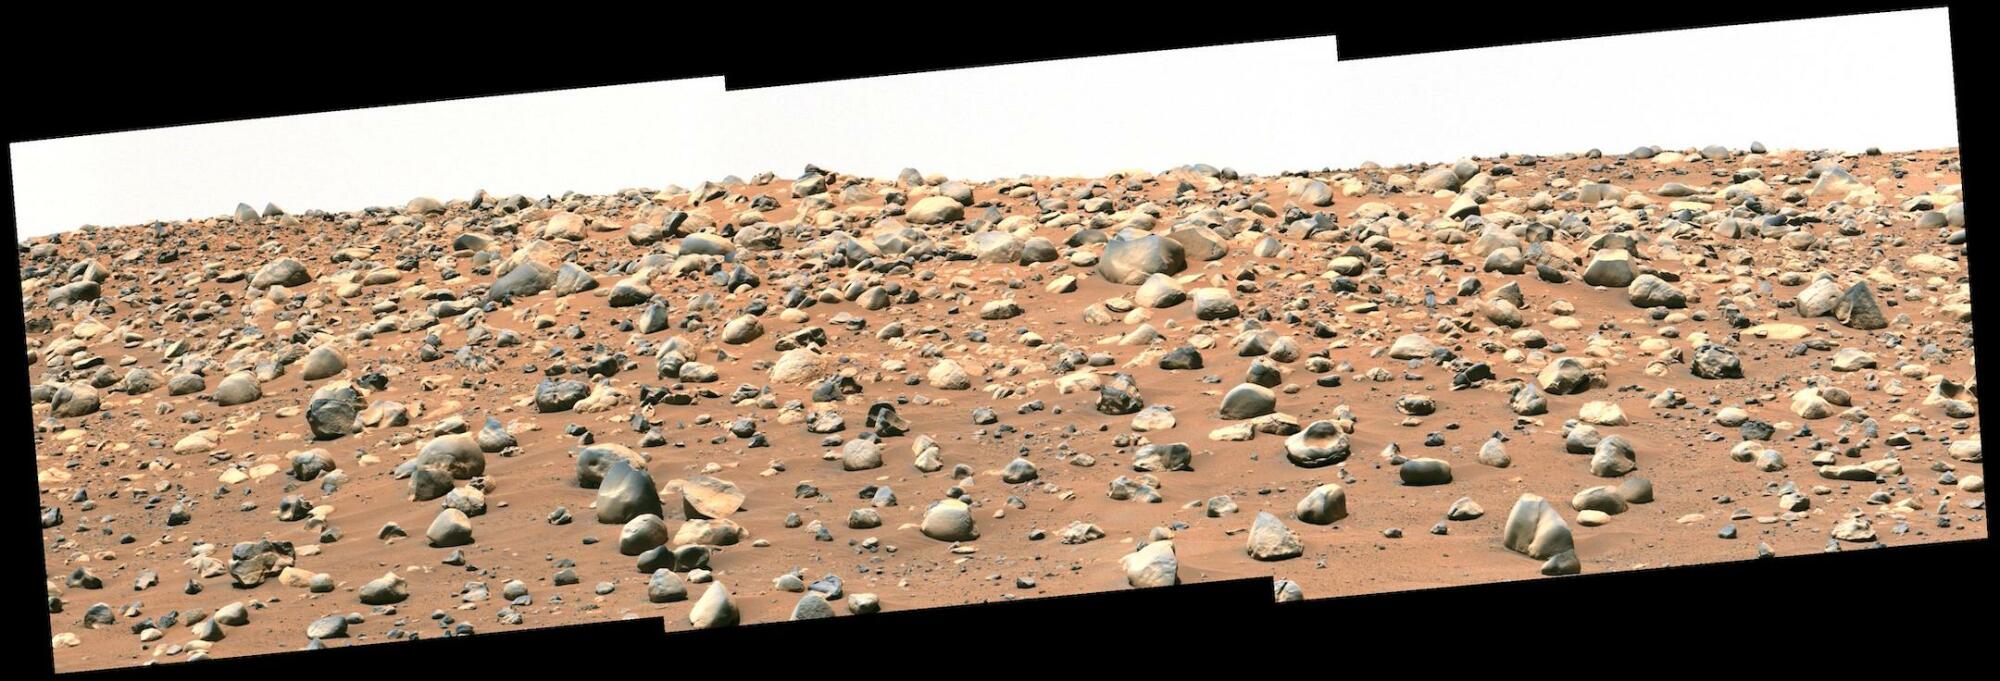 The Perseverance rover captured this boulder-strewn area called "Castell Henllys" from 328 feet (100 meters) away.